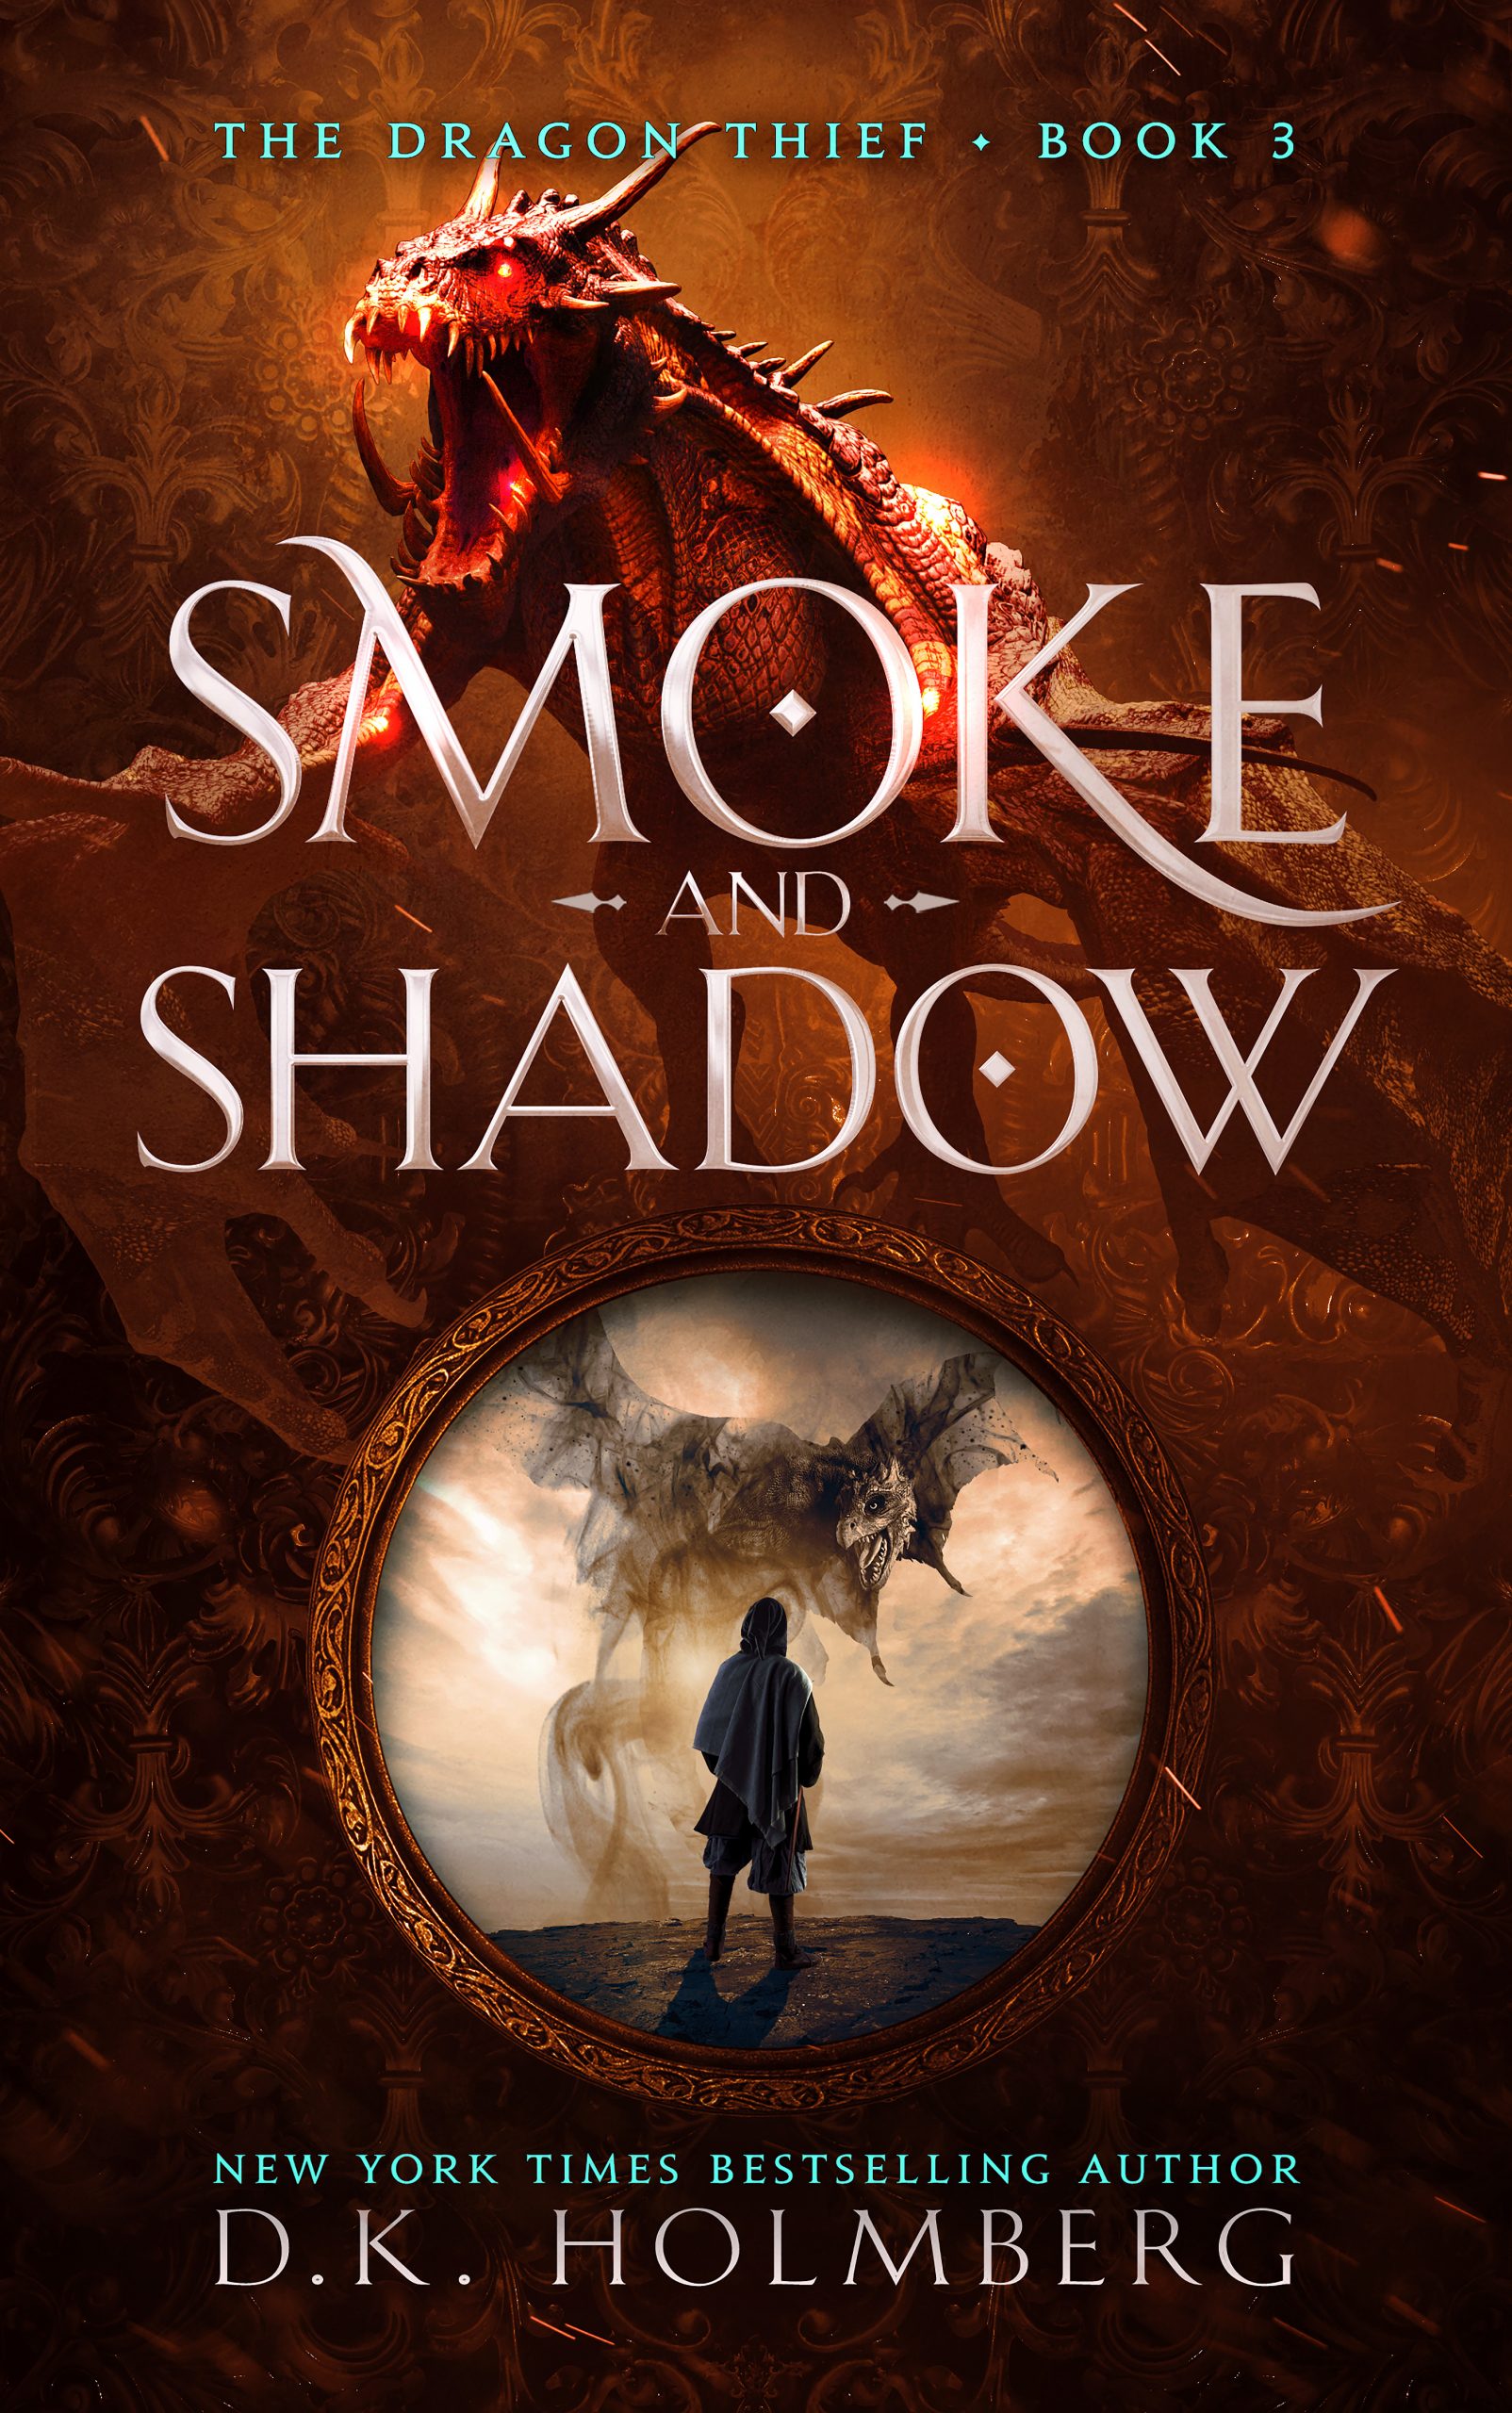 https://www.dkholmberg.com/wp-content/uploads/2022/08/DT-3-Smoke-and-Shadow-eBook-scaled.jpg